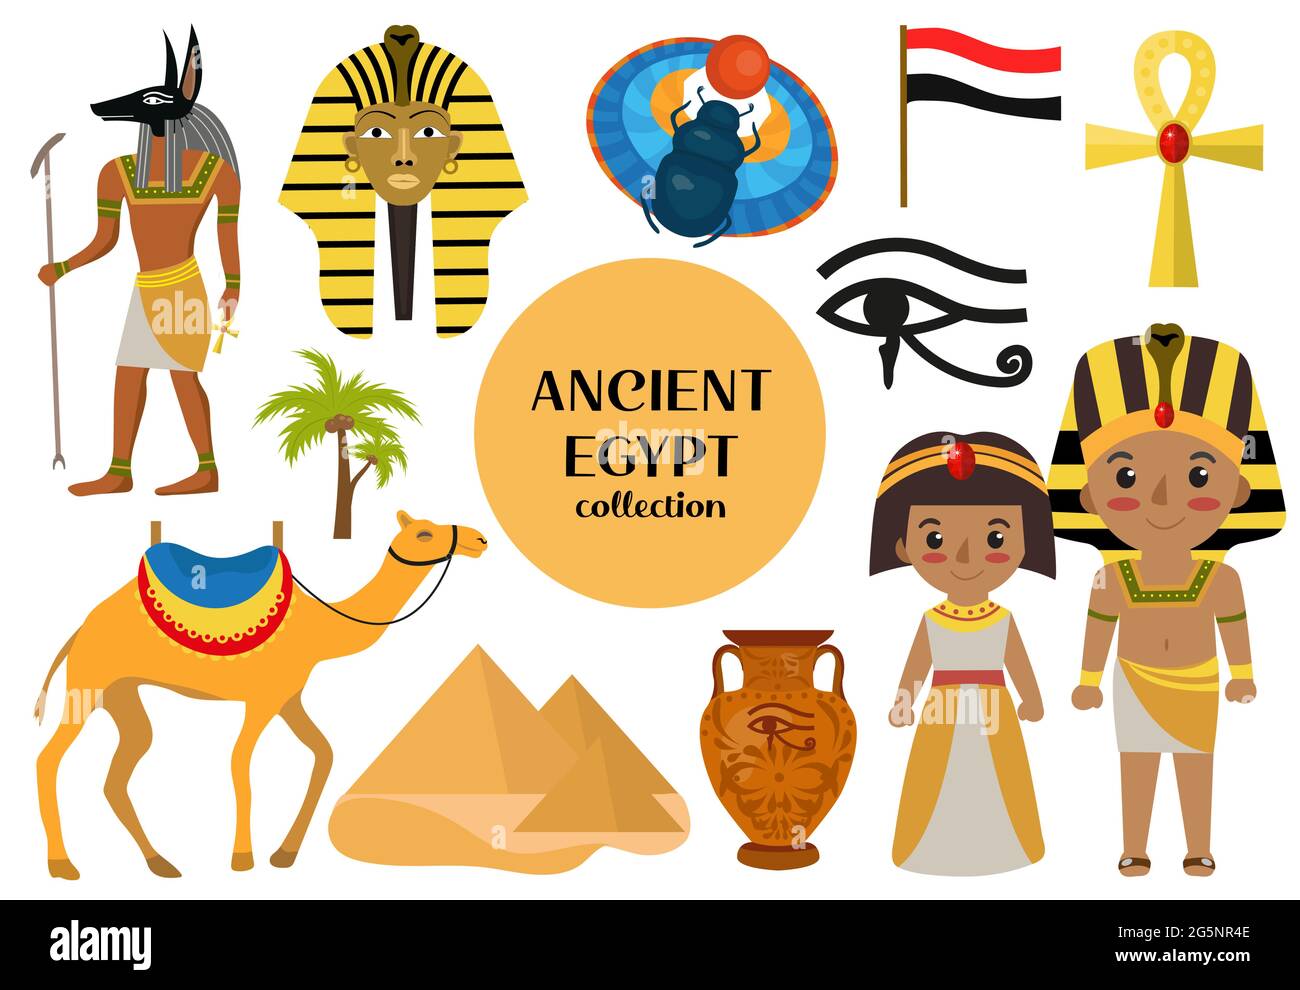 Ancient Egypt set objects clip art. Collection design elements witch sorrow beetles, Pharaoh, pyramid, ankh, Anubis, camel, antique hieroglyph Stock Vector